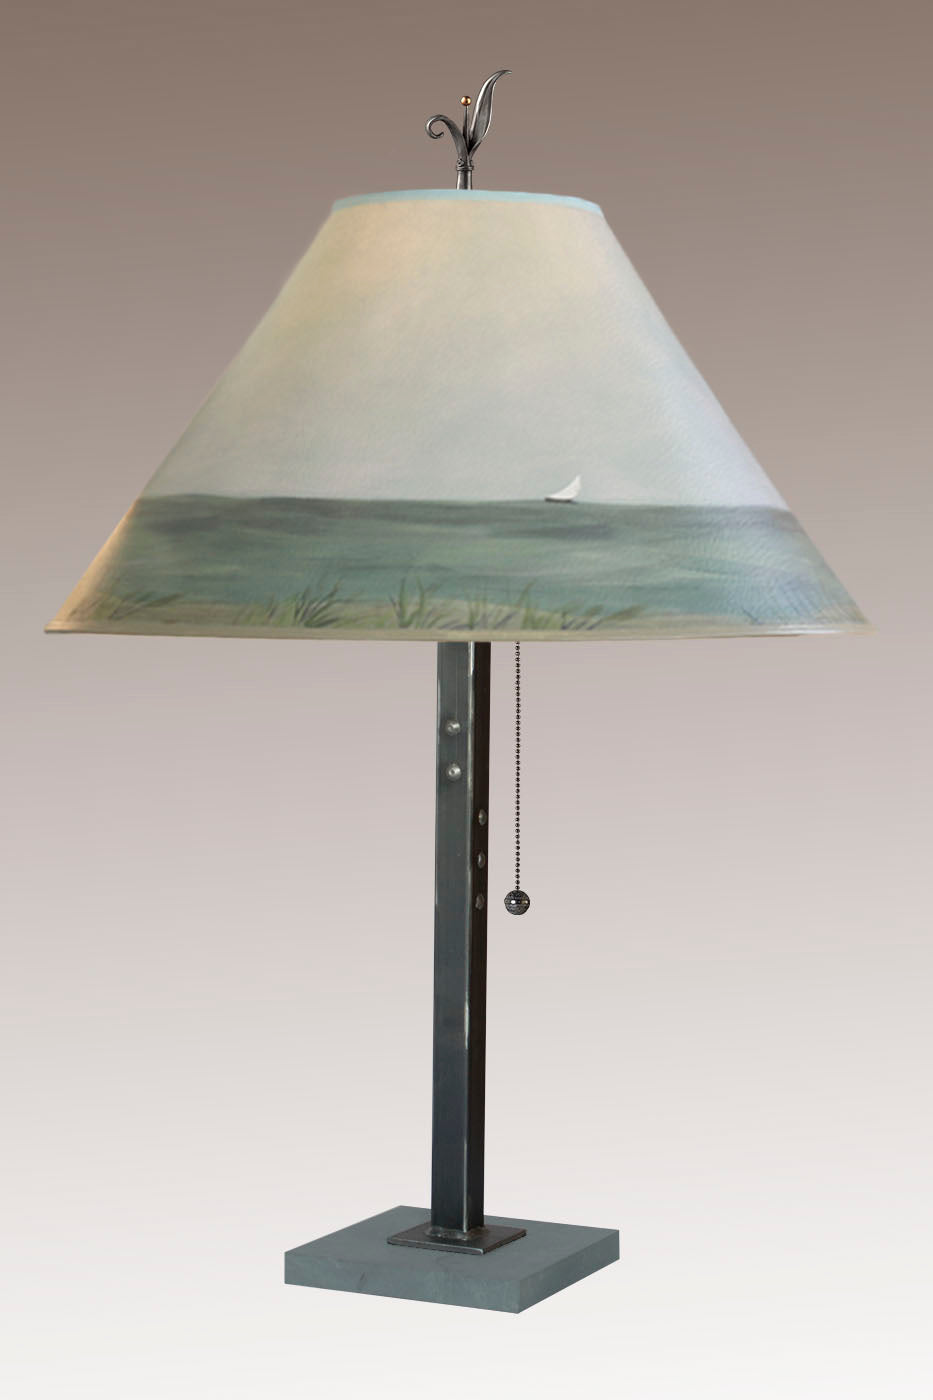 Steel Table Lamp with Large Conical Shade in Shore